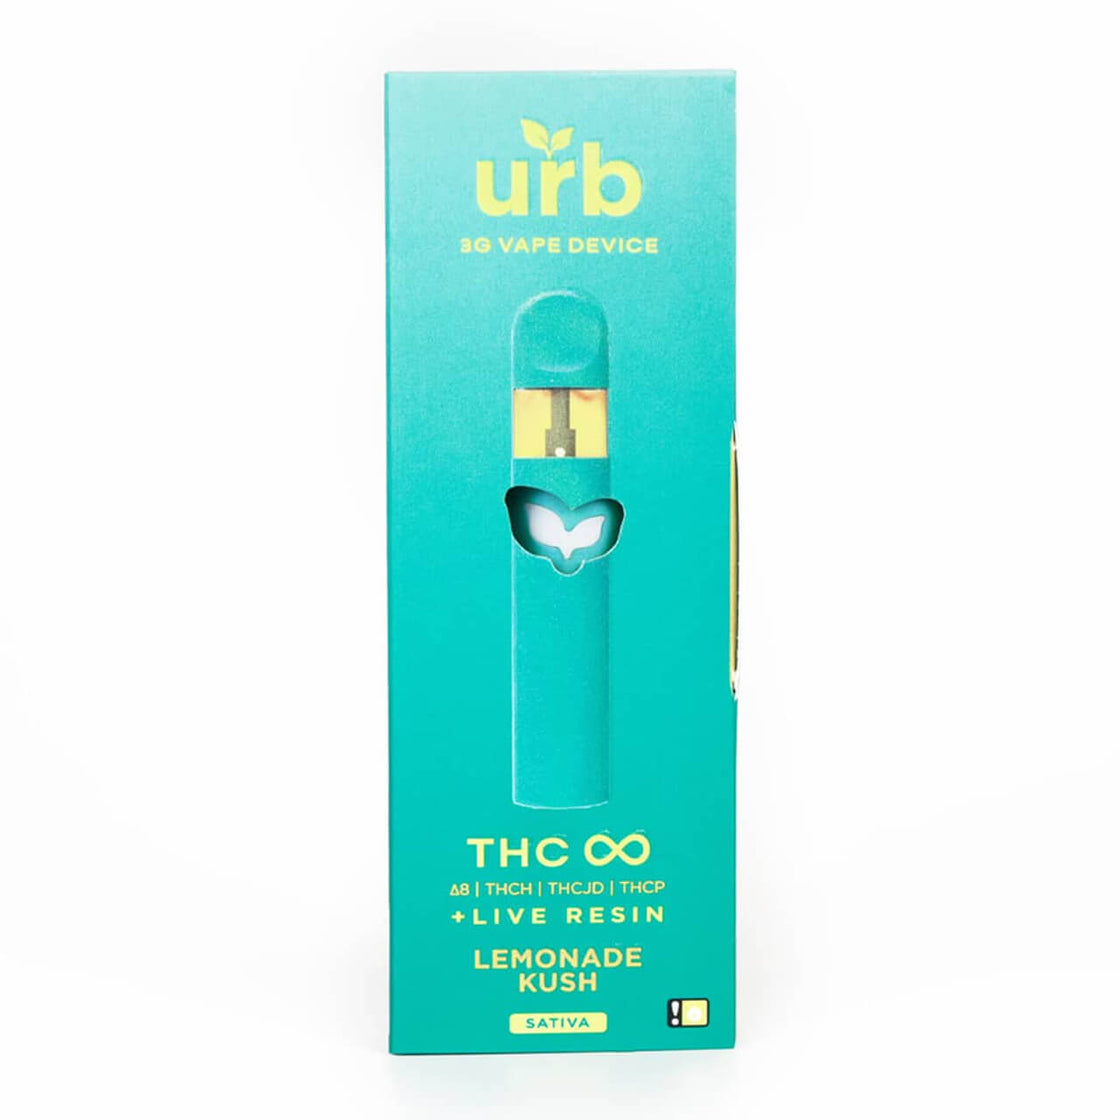 URB THC INFINITY LIVE RESIN 3GM D8 + THCH + THCJD +THCP DISPOSABLE